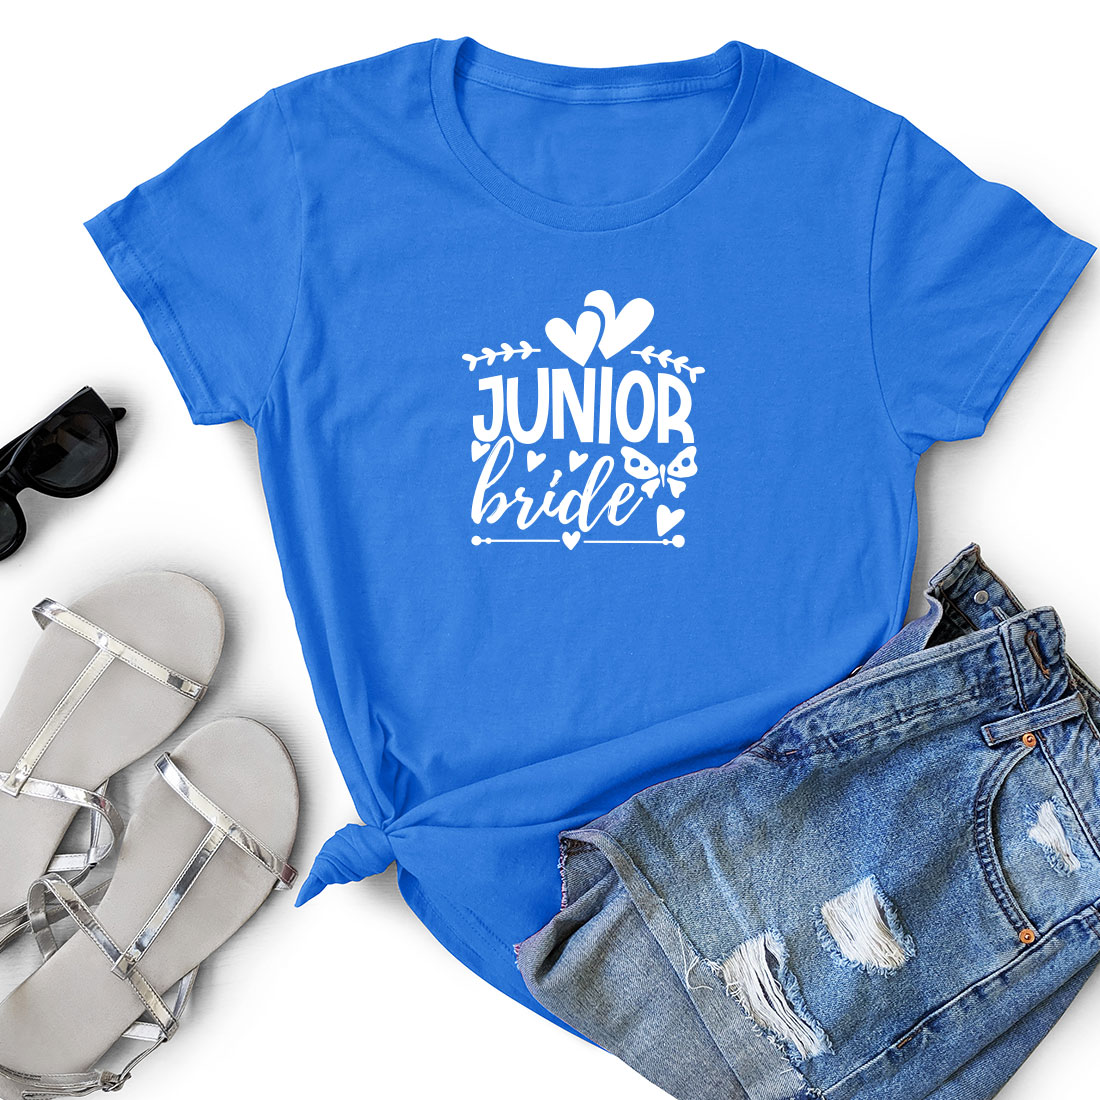 T - shirt that says junior bride next to a pair of shorts.